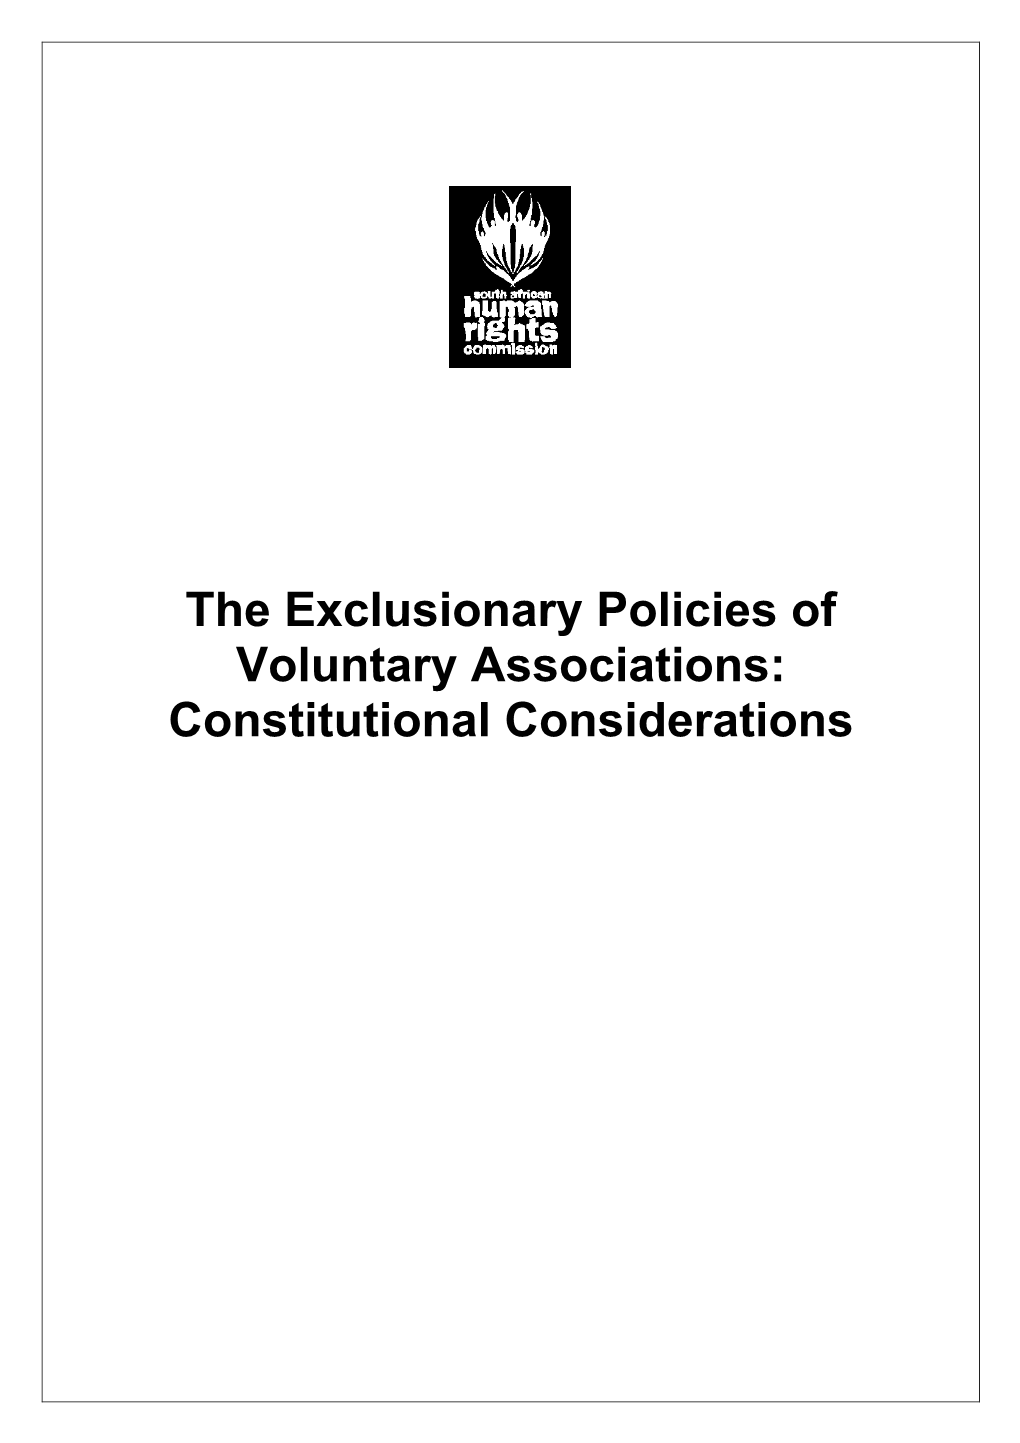 Exclusionary Policies of Voluntary Associations: Constitutional Considerations